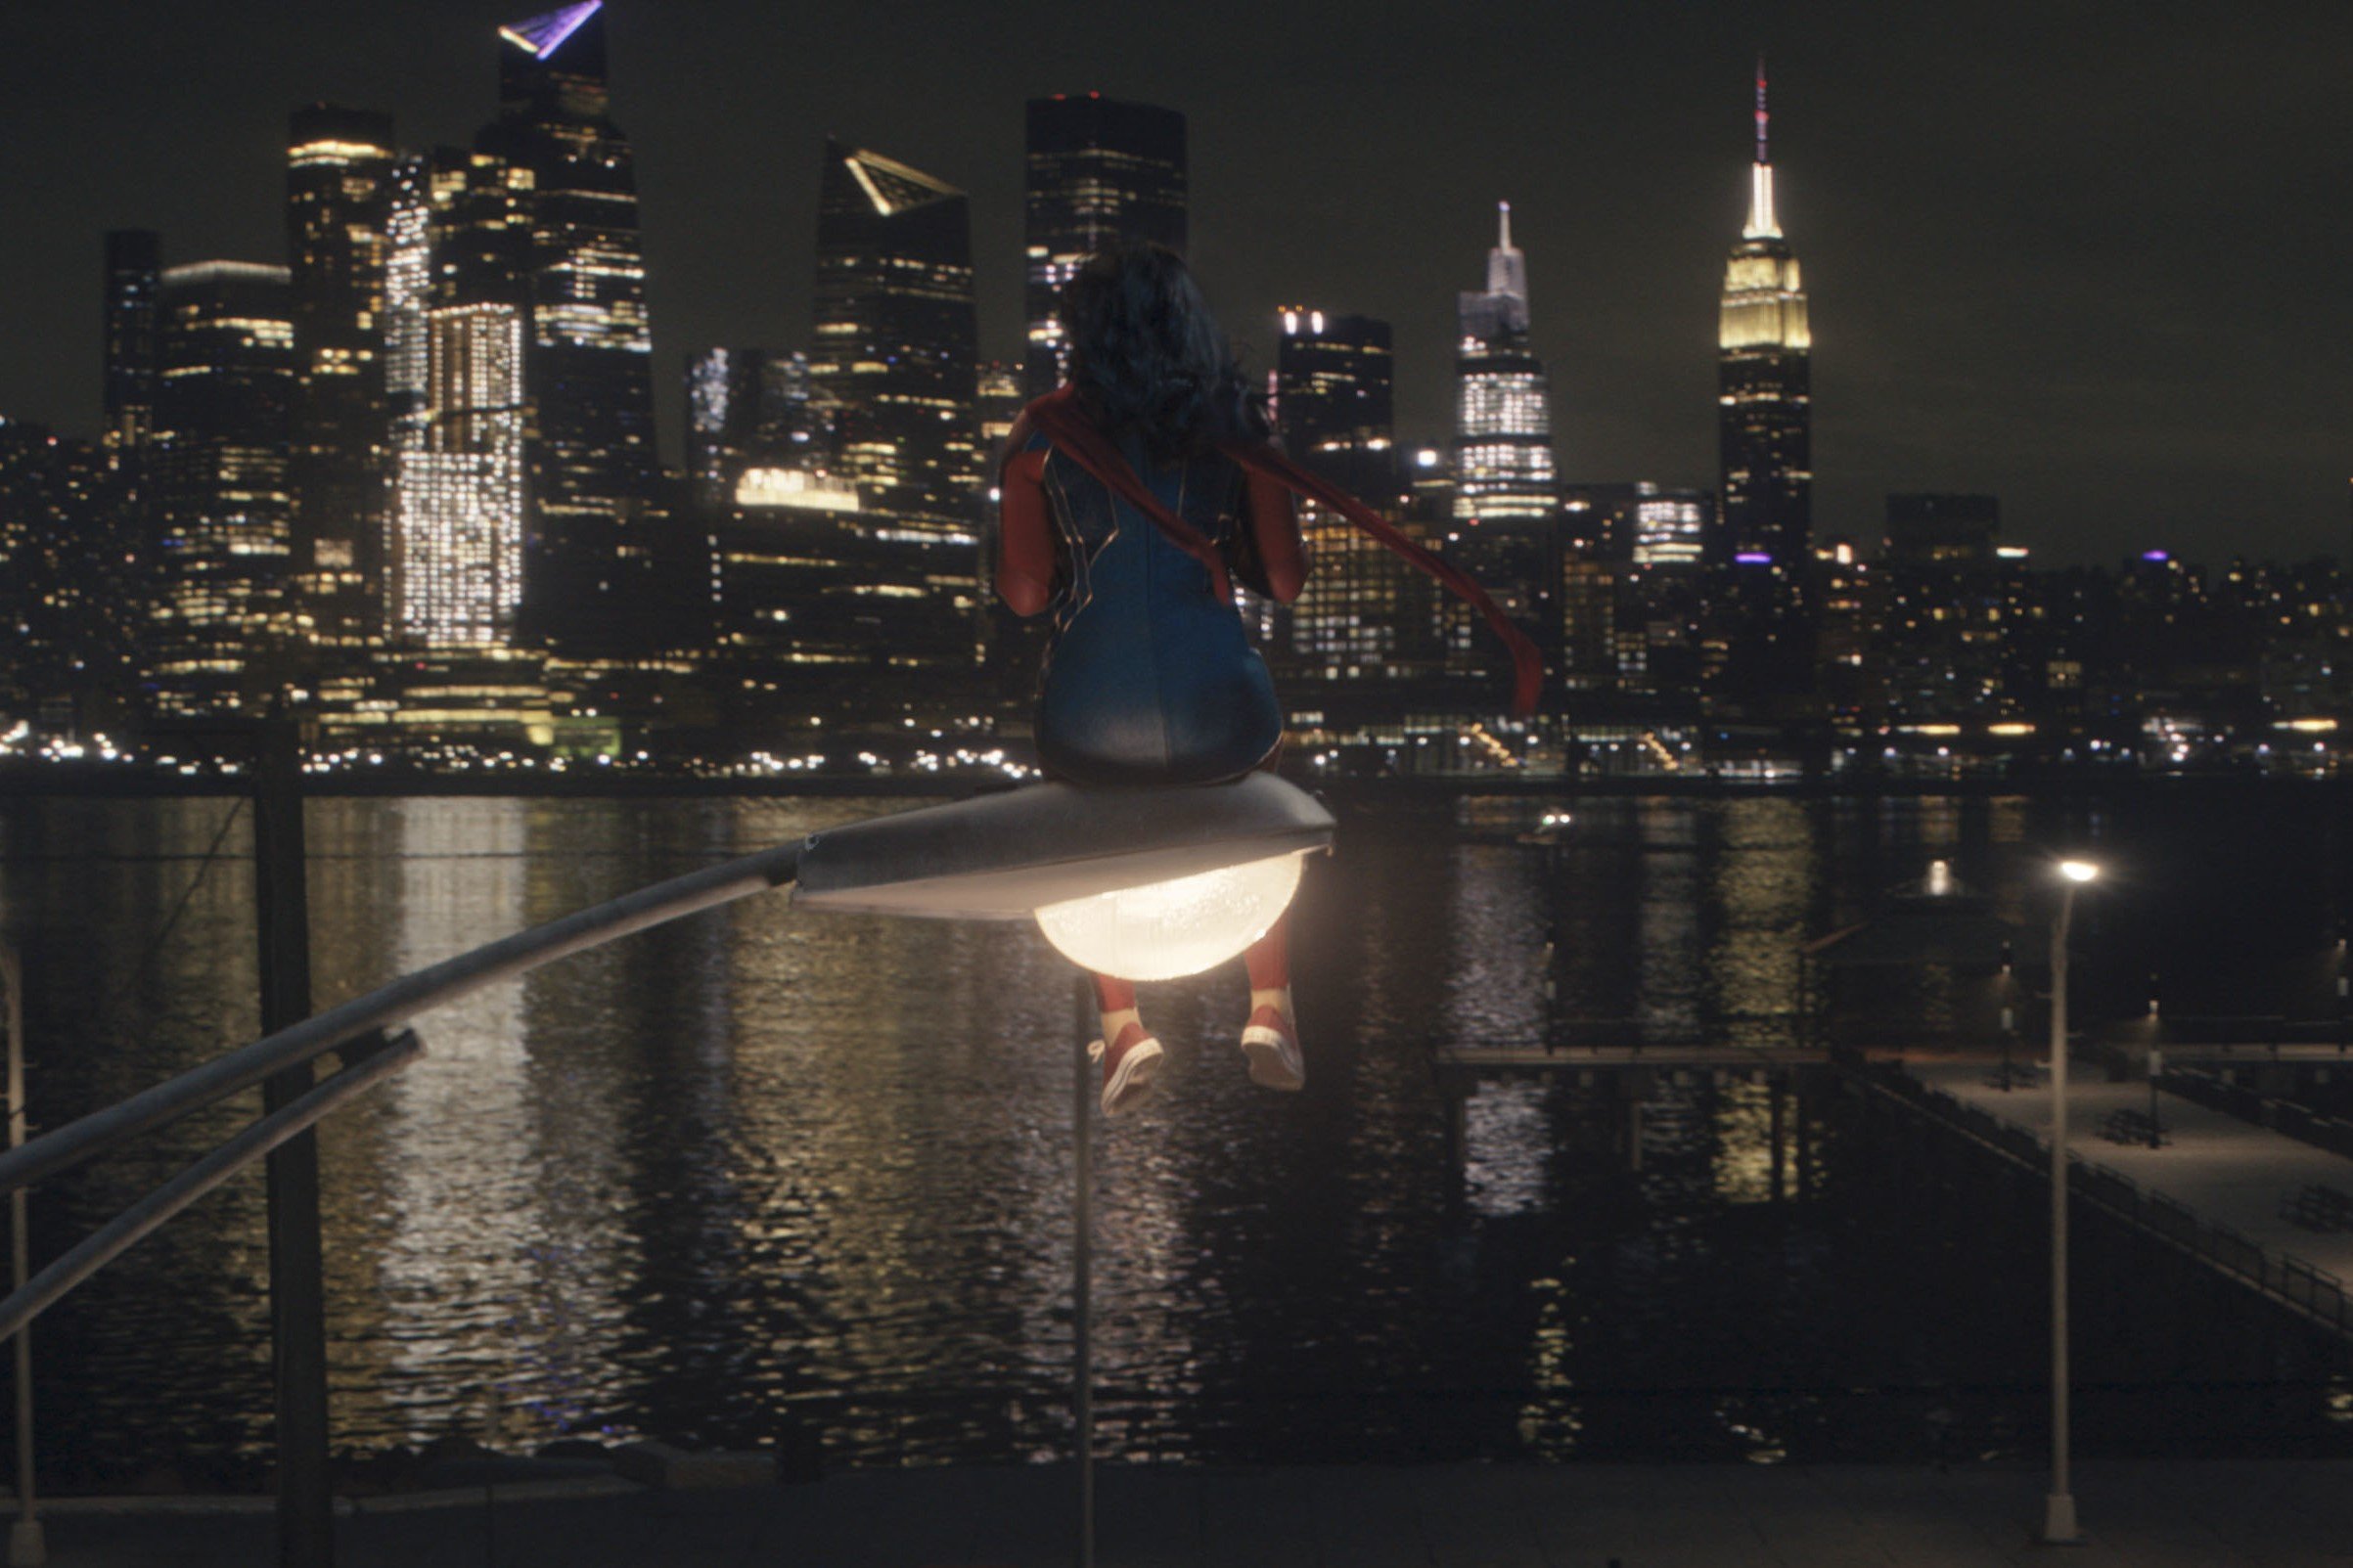 Iman Vellani, in character as Kamala Khan in 'Ms. Marvel,' which might have a season 2 on Disney+, wears her Ms. Marvel costume and sits on a street light and looks at the New York City skyline.